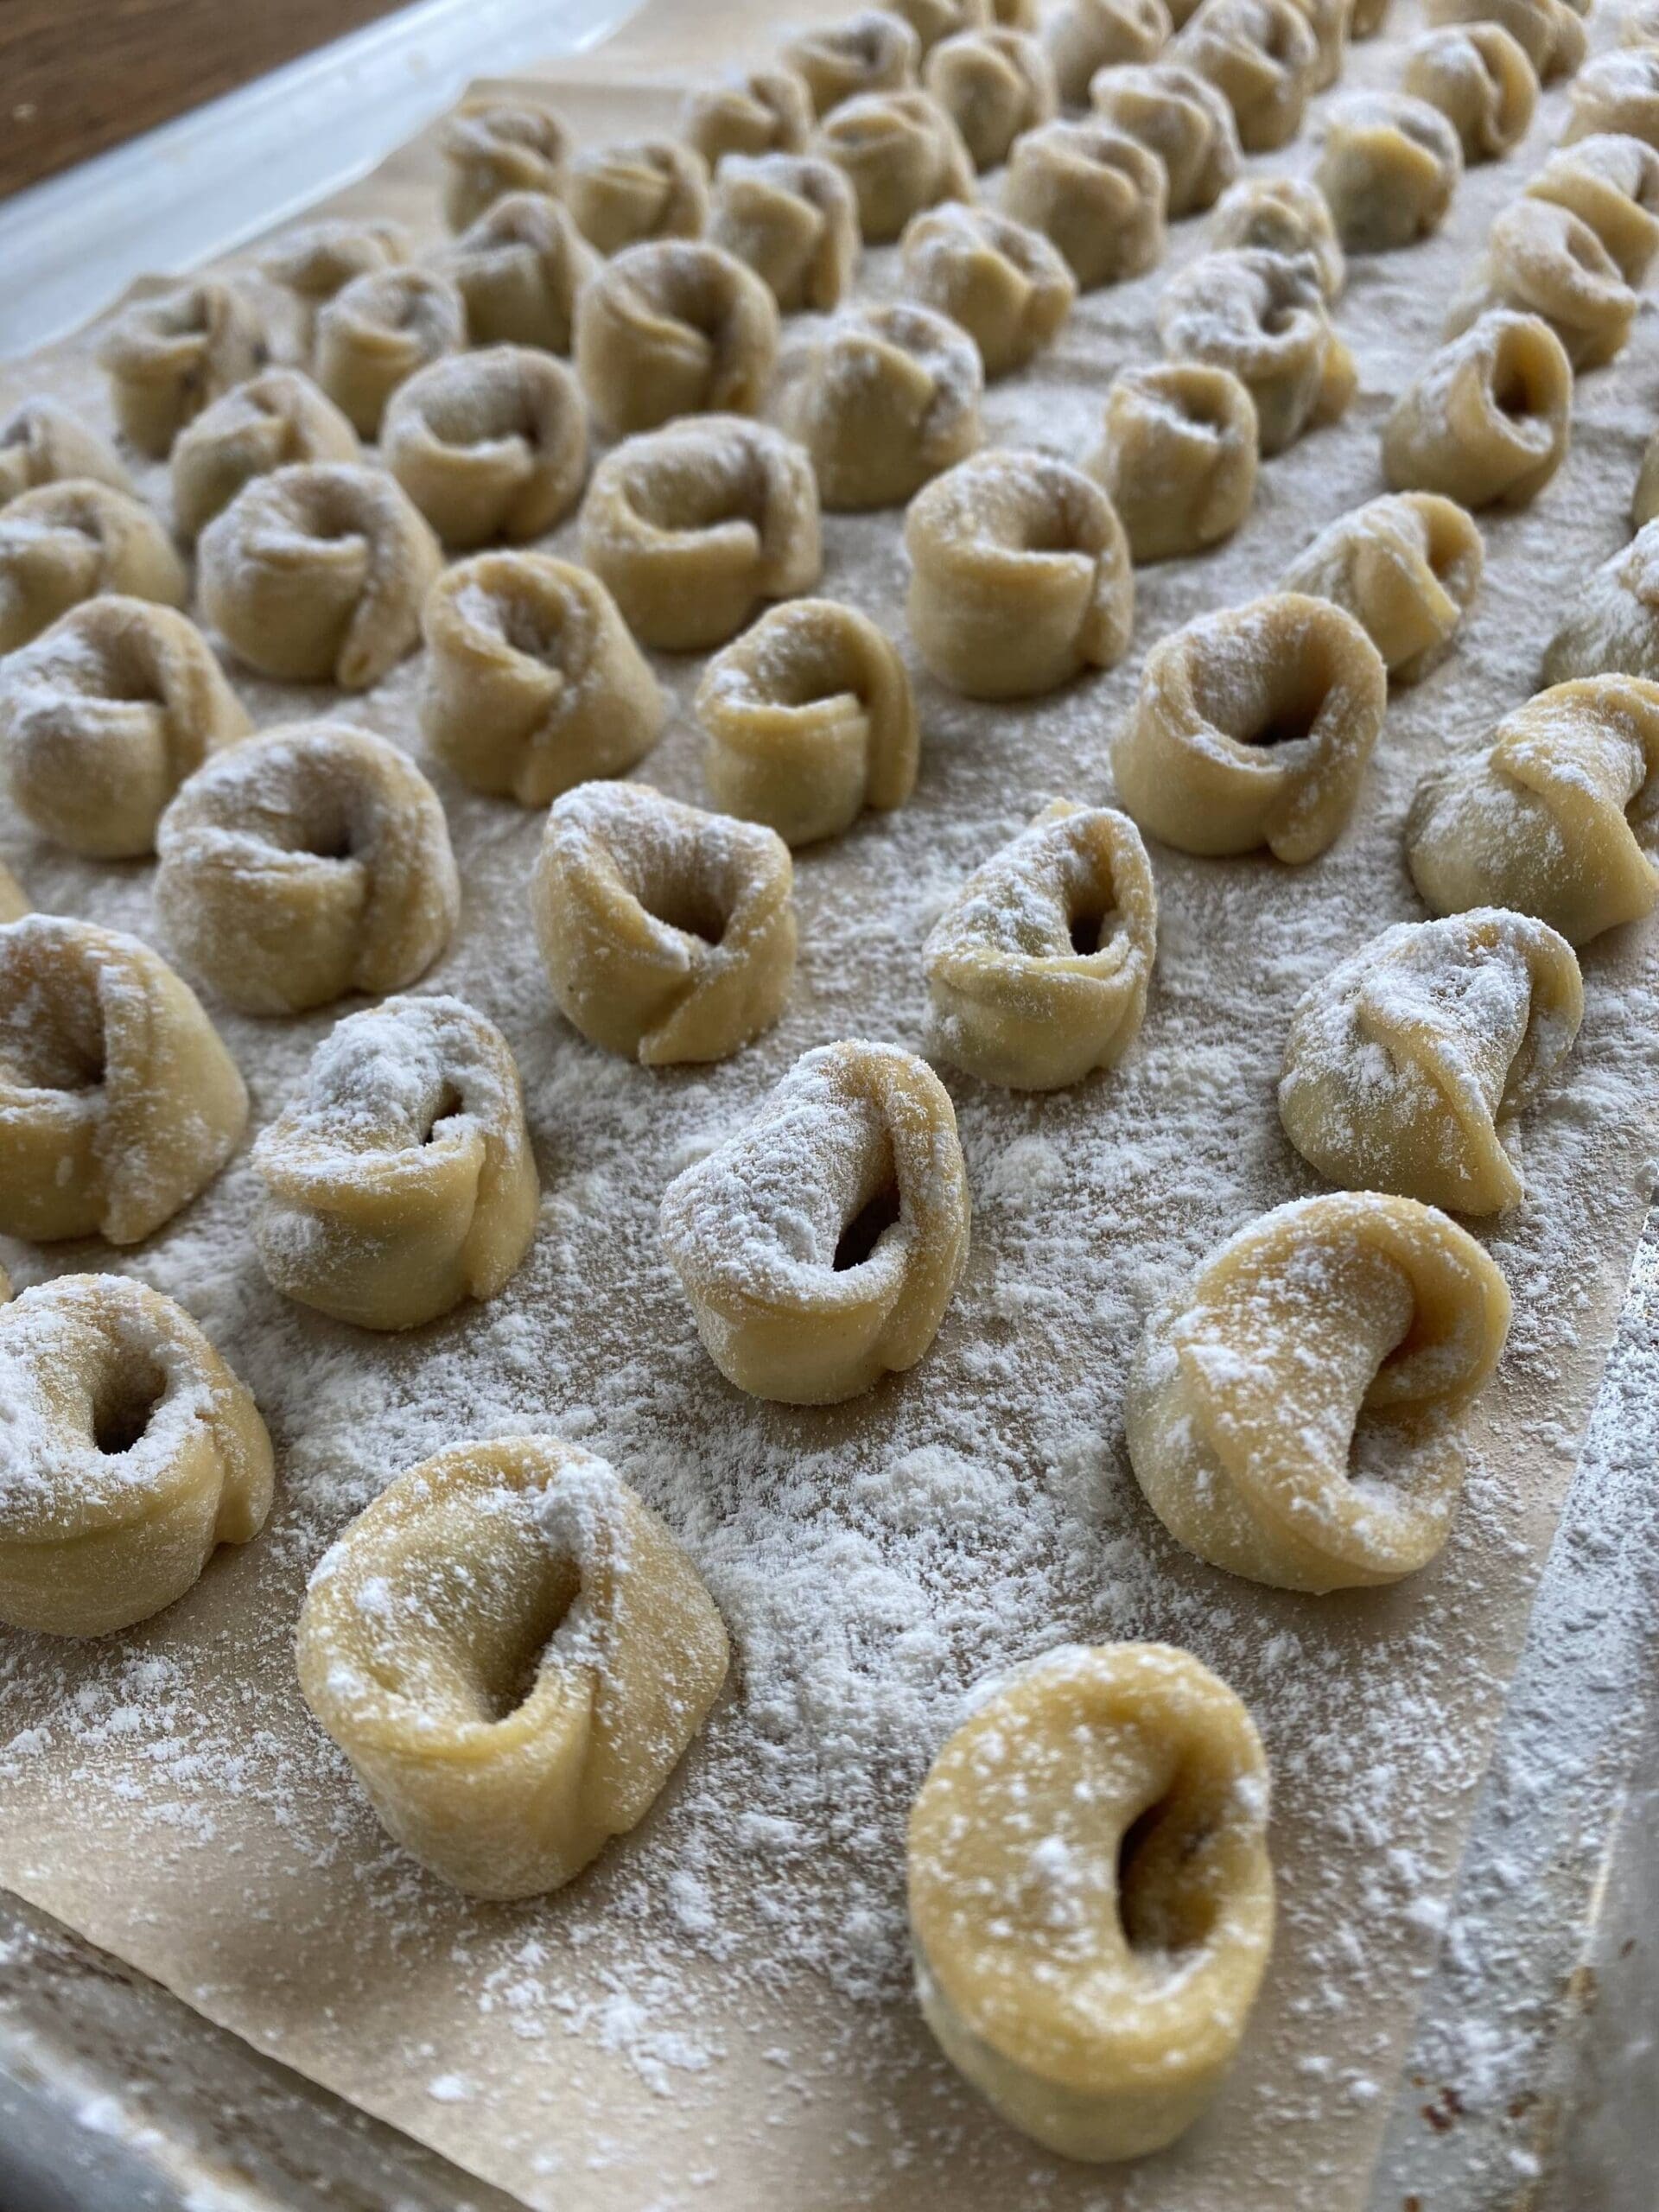 Photo by Tressa Dale/Peninsula Clarion
Mushroom and prosciutto tortellini are ready for freezing or boiling.